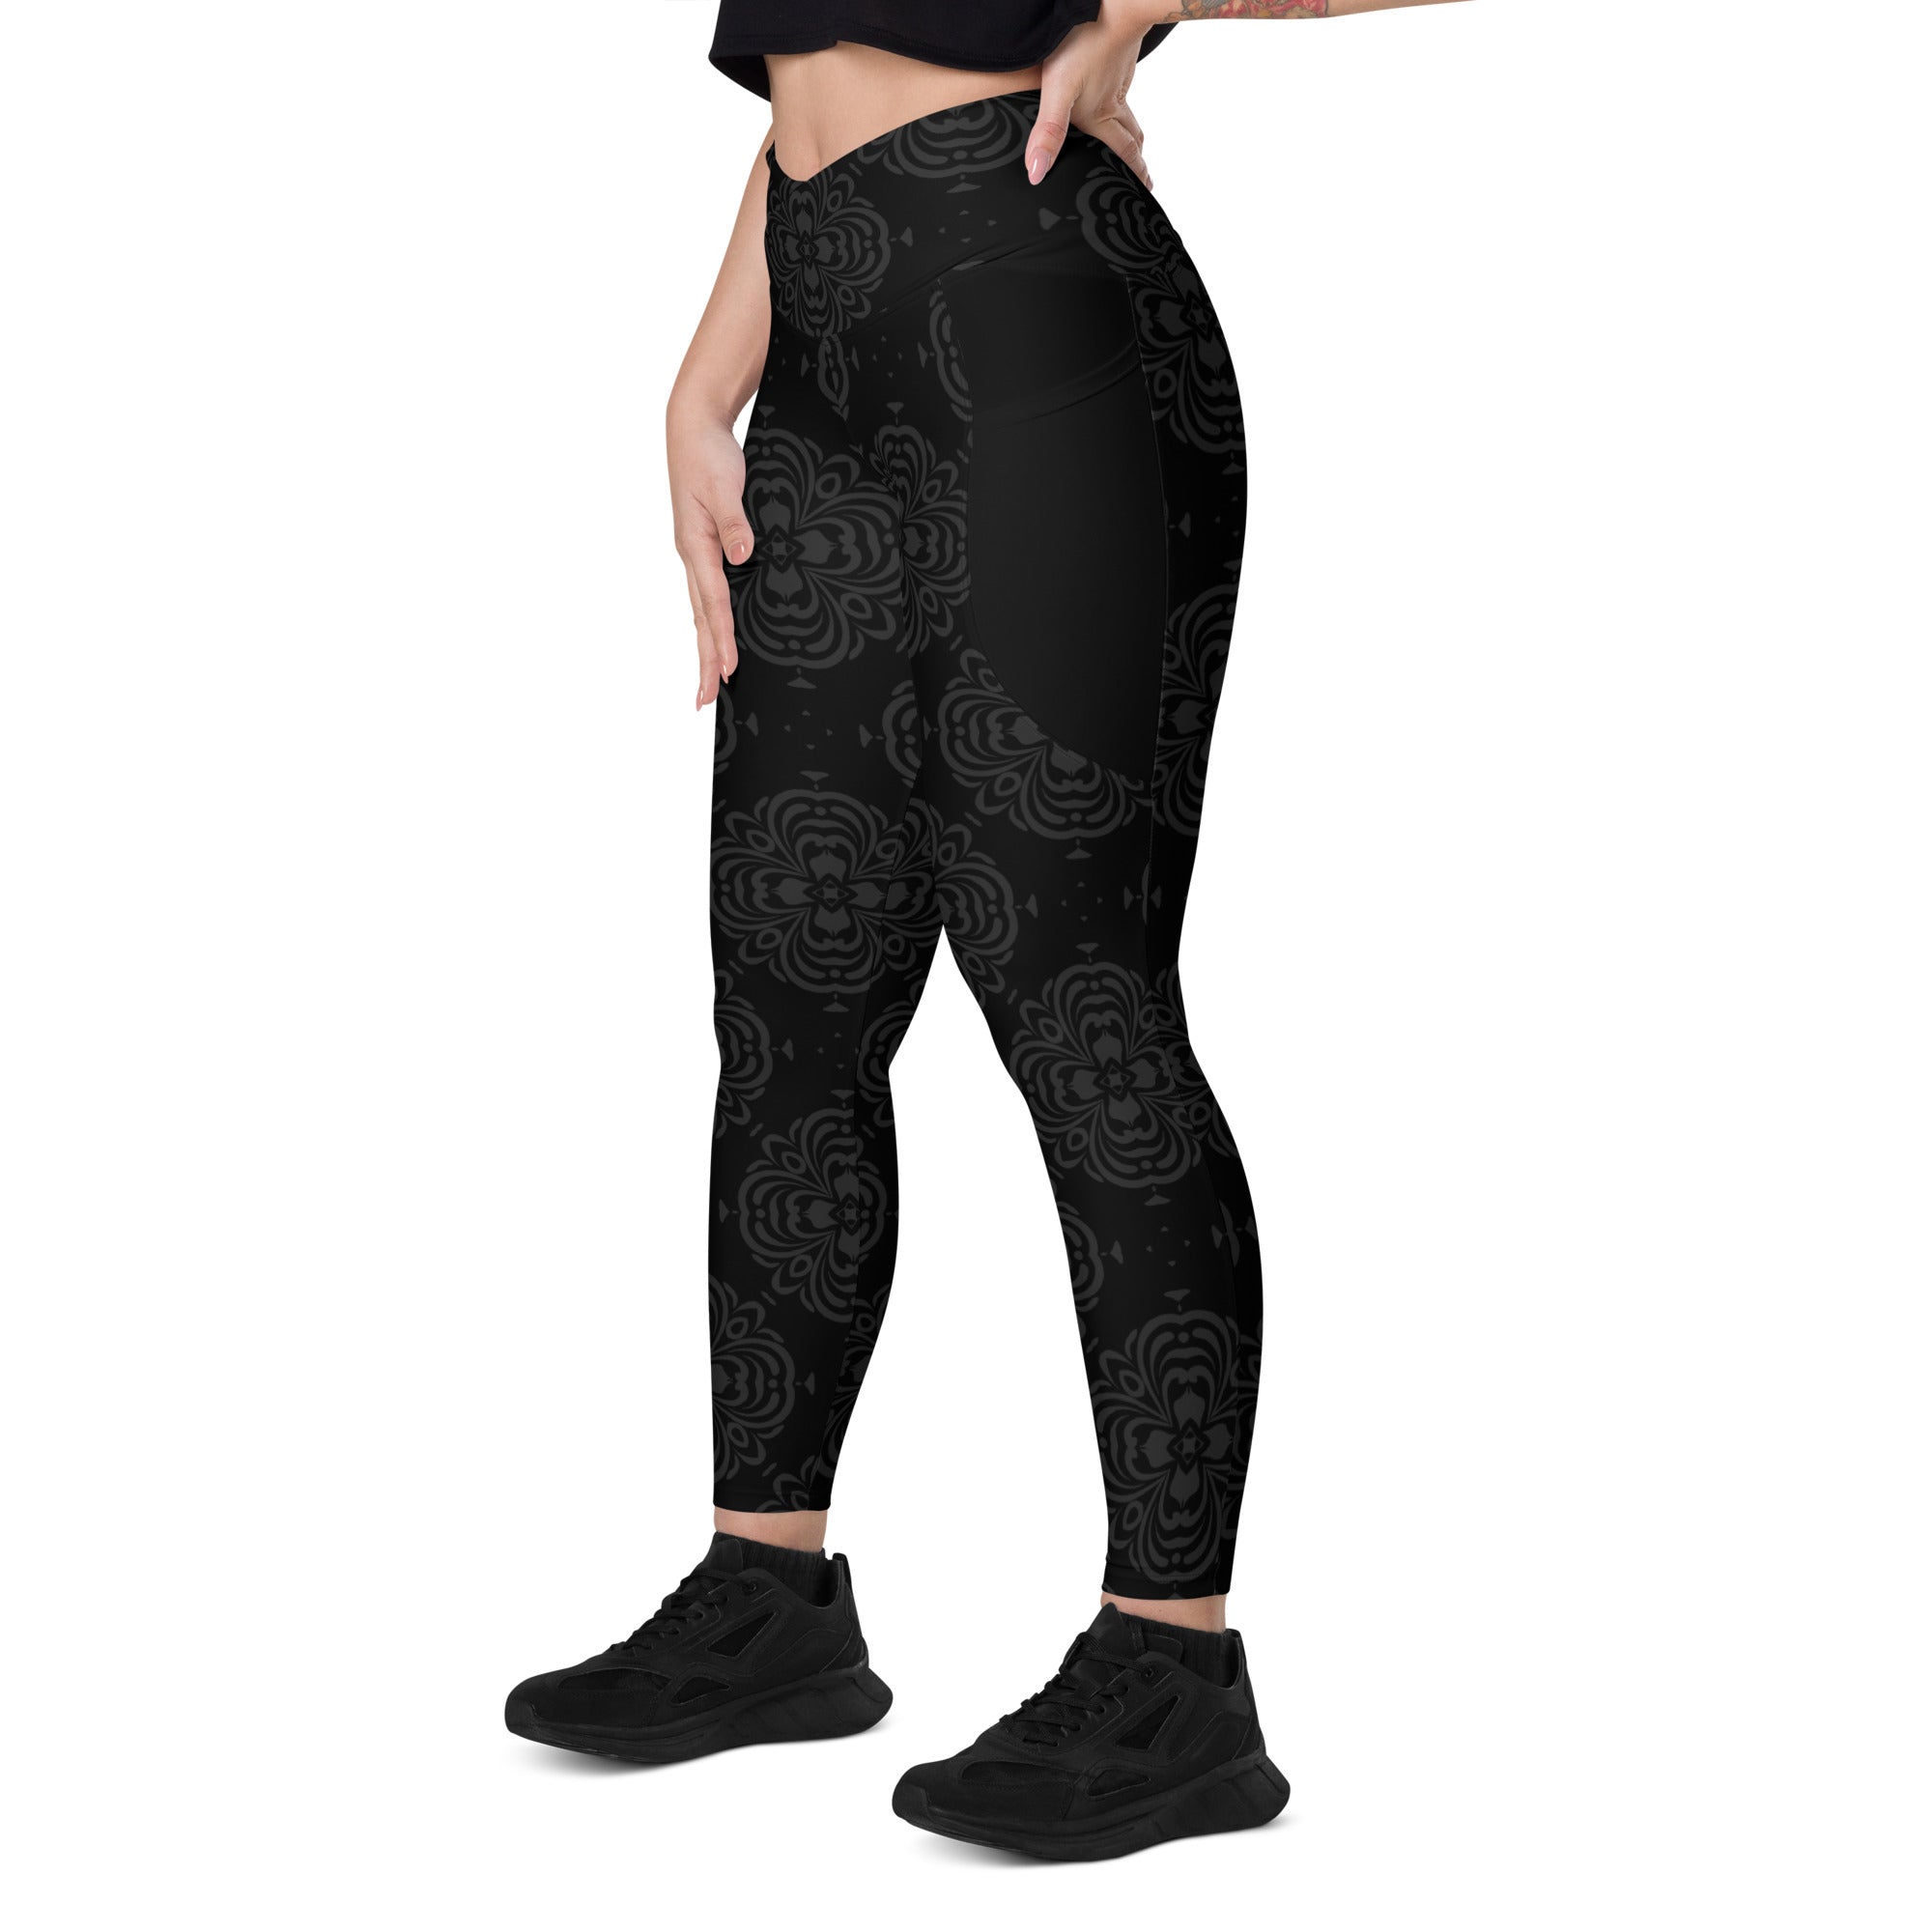 High-waisted camouflage leggings with crossover waistband detail.